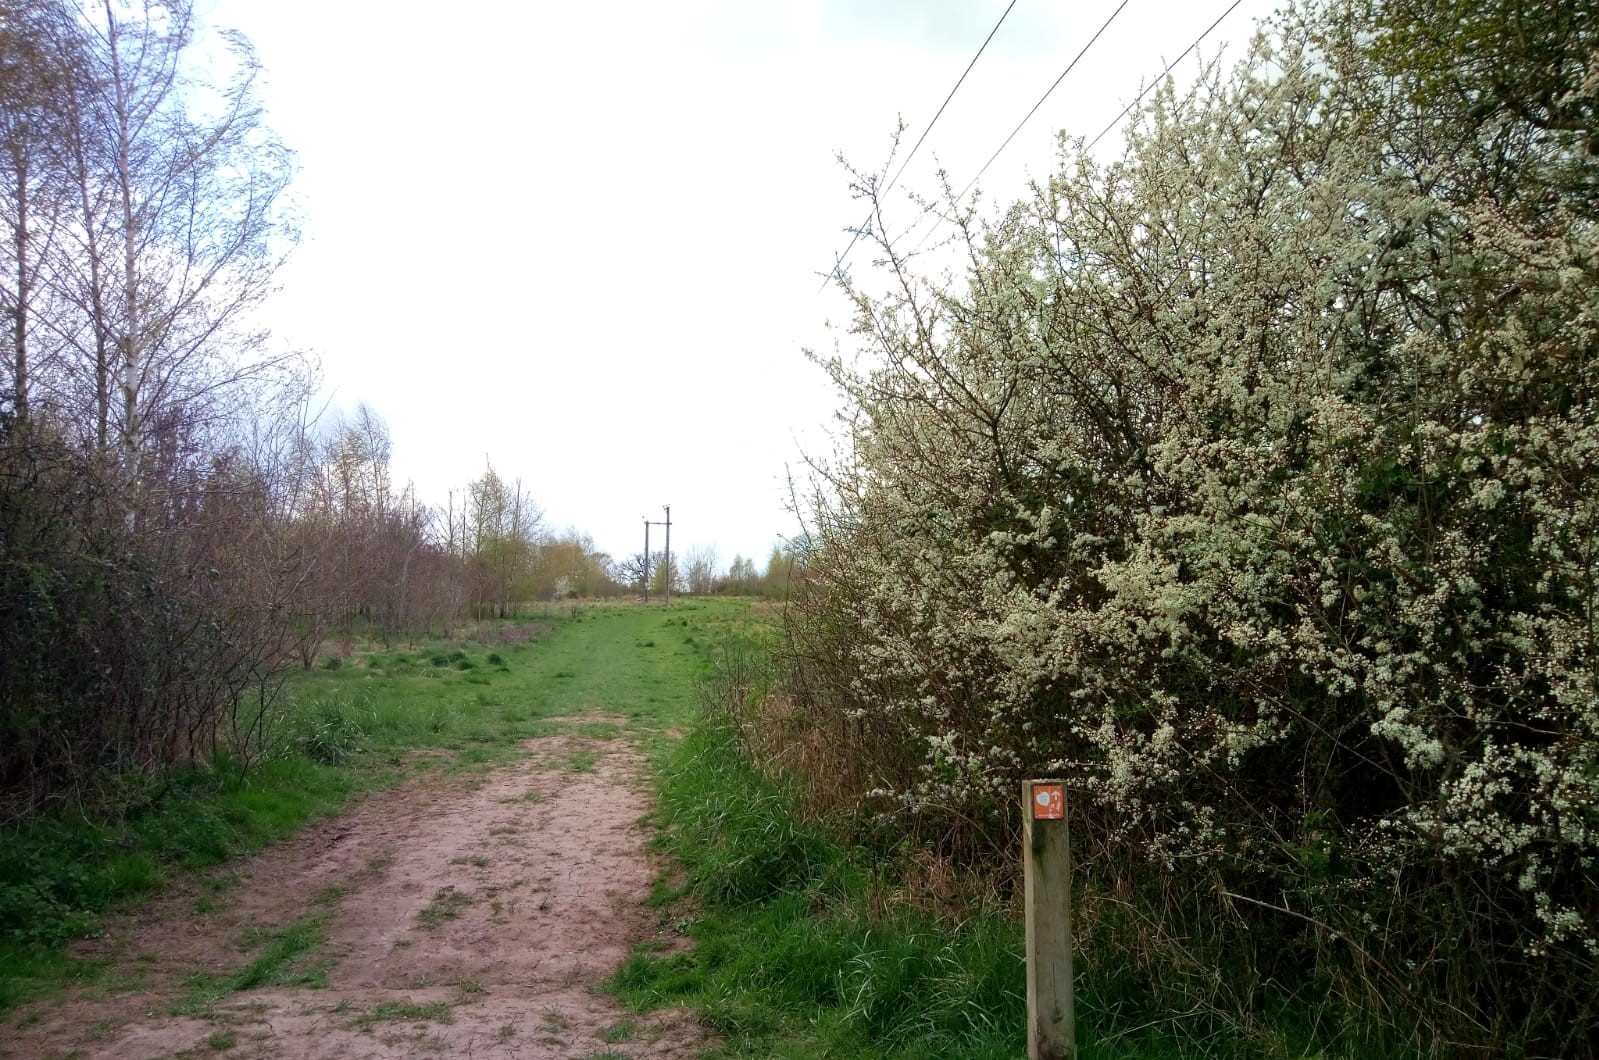 Waymarker next to footpath going through a hedge with blossom